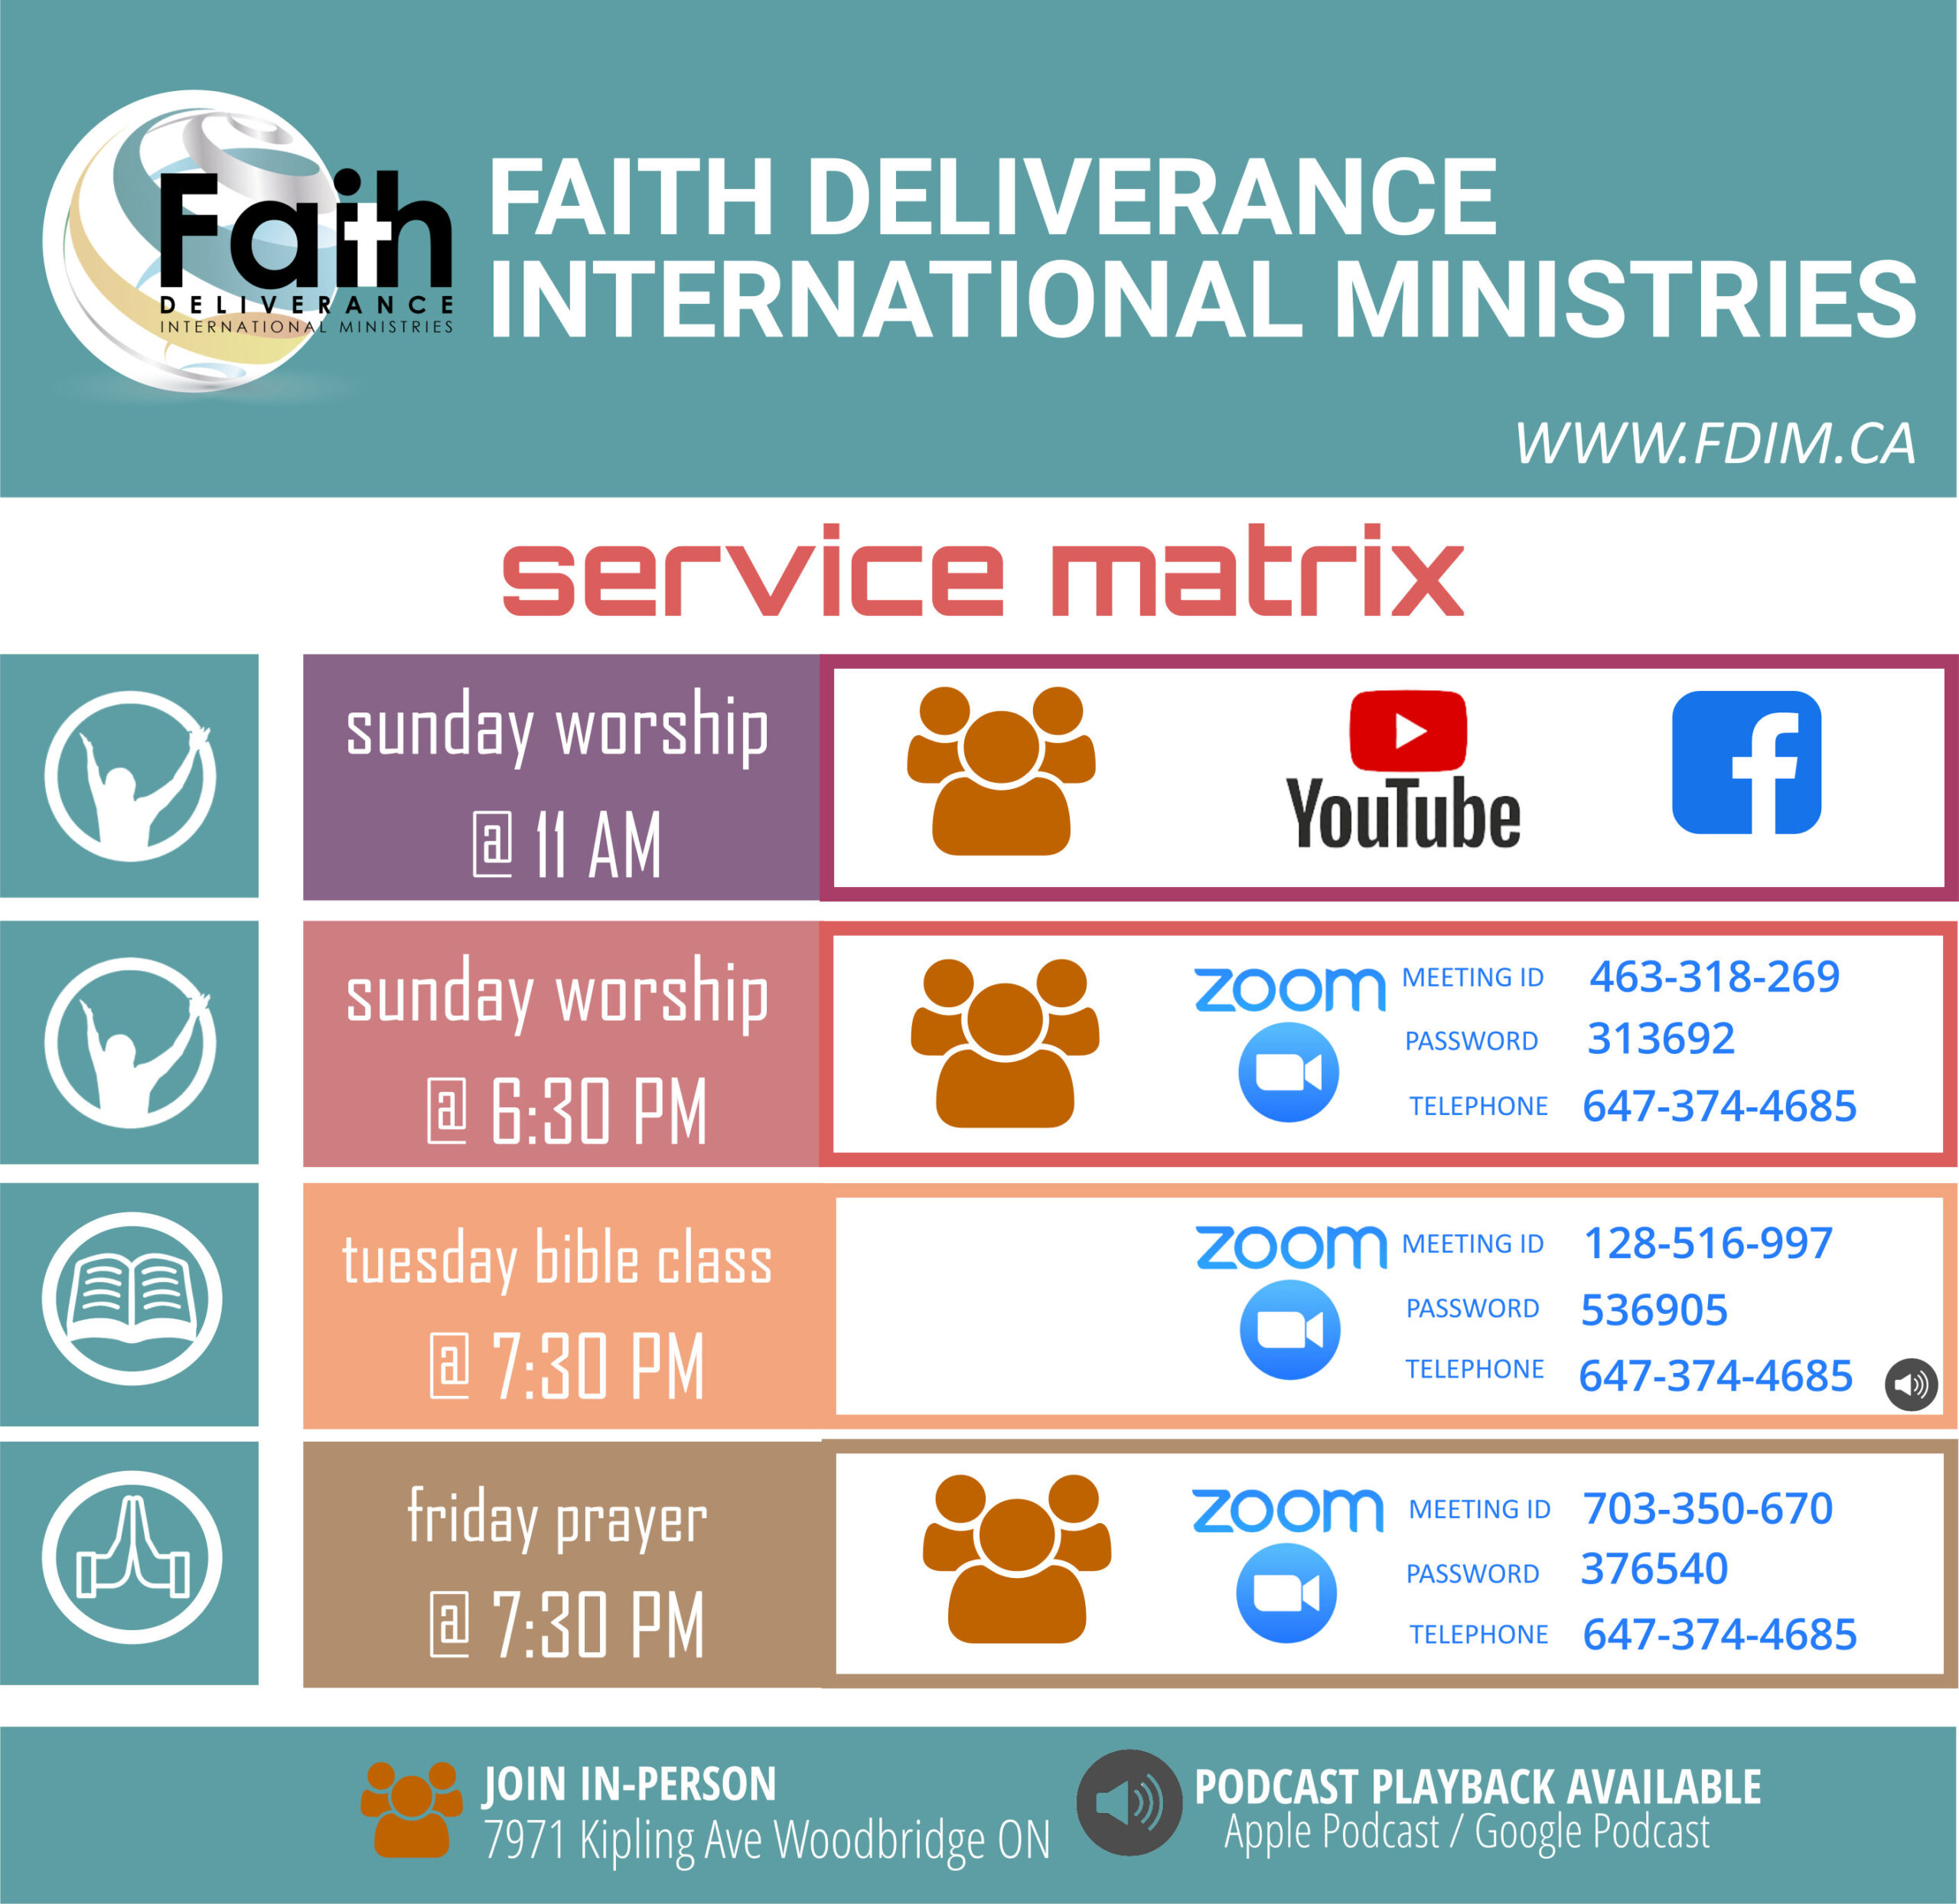 Schedule and access to church services